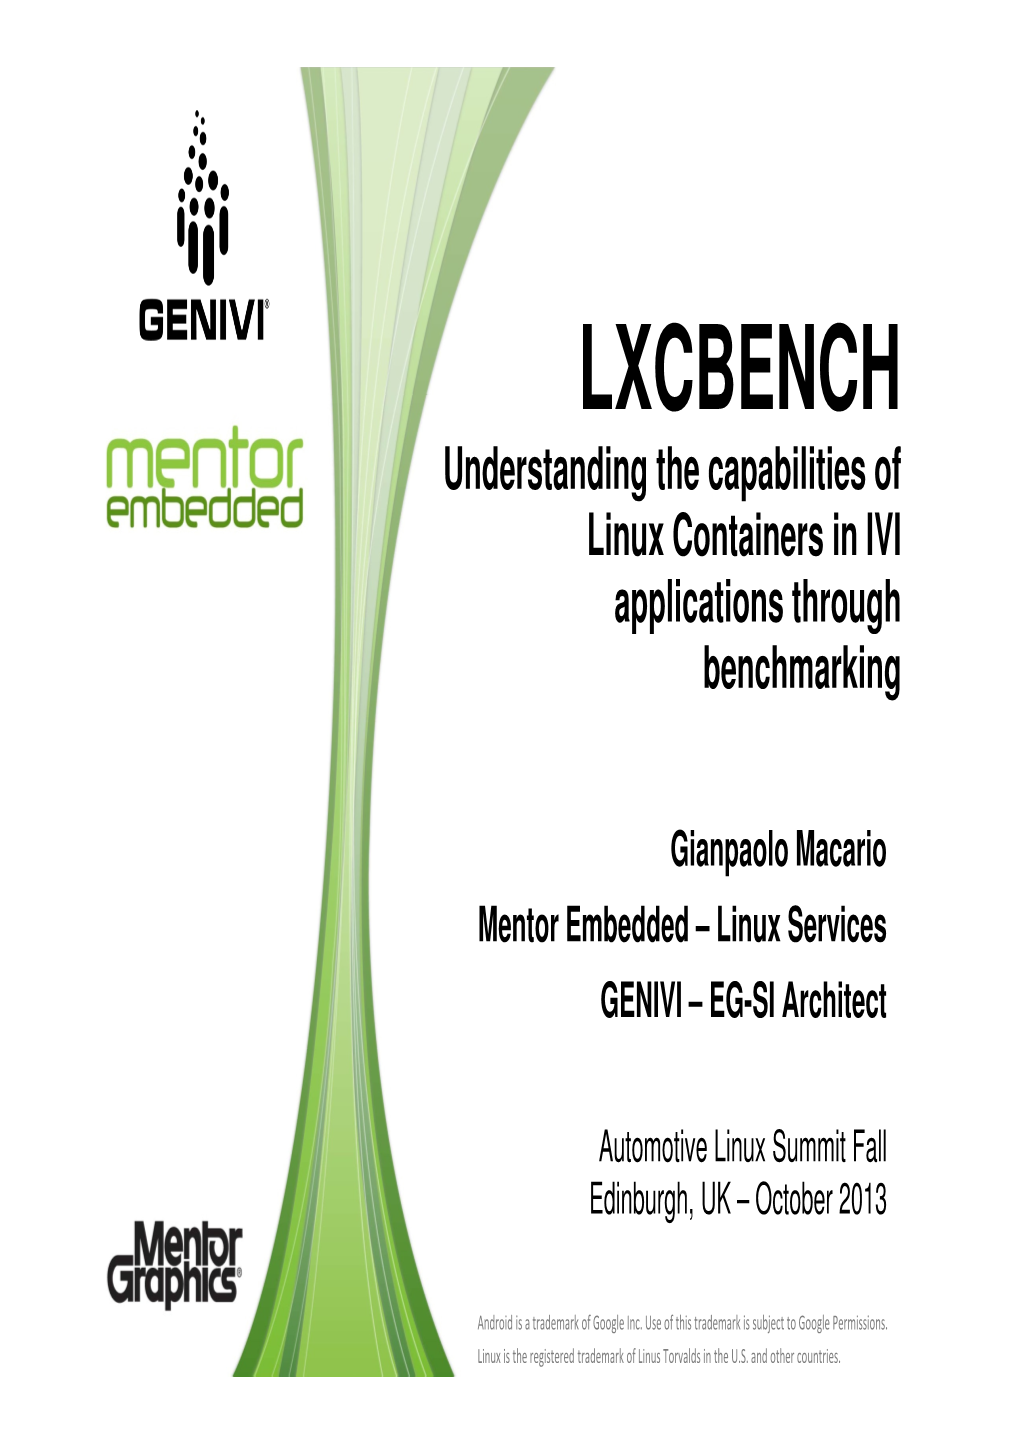 LXCBENCH Understanding the Capabilities of Linux Containers in IVI Applications Through Benchmarking